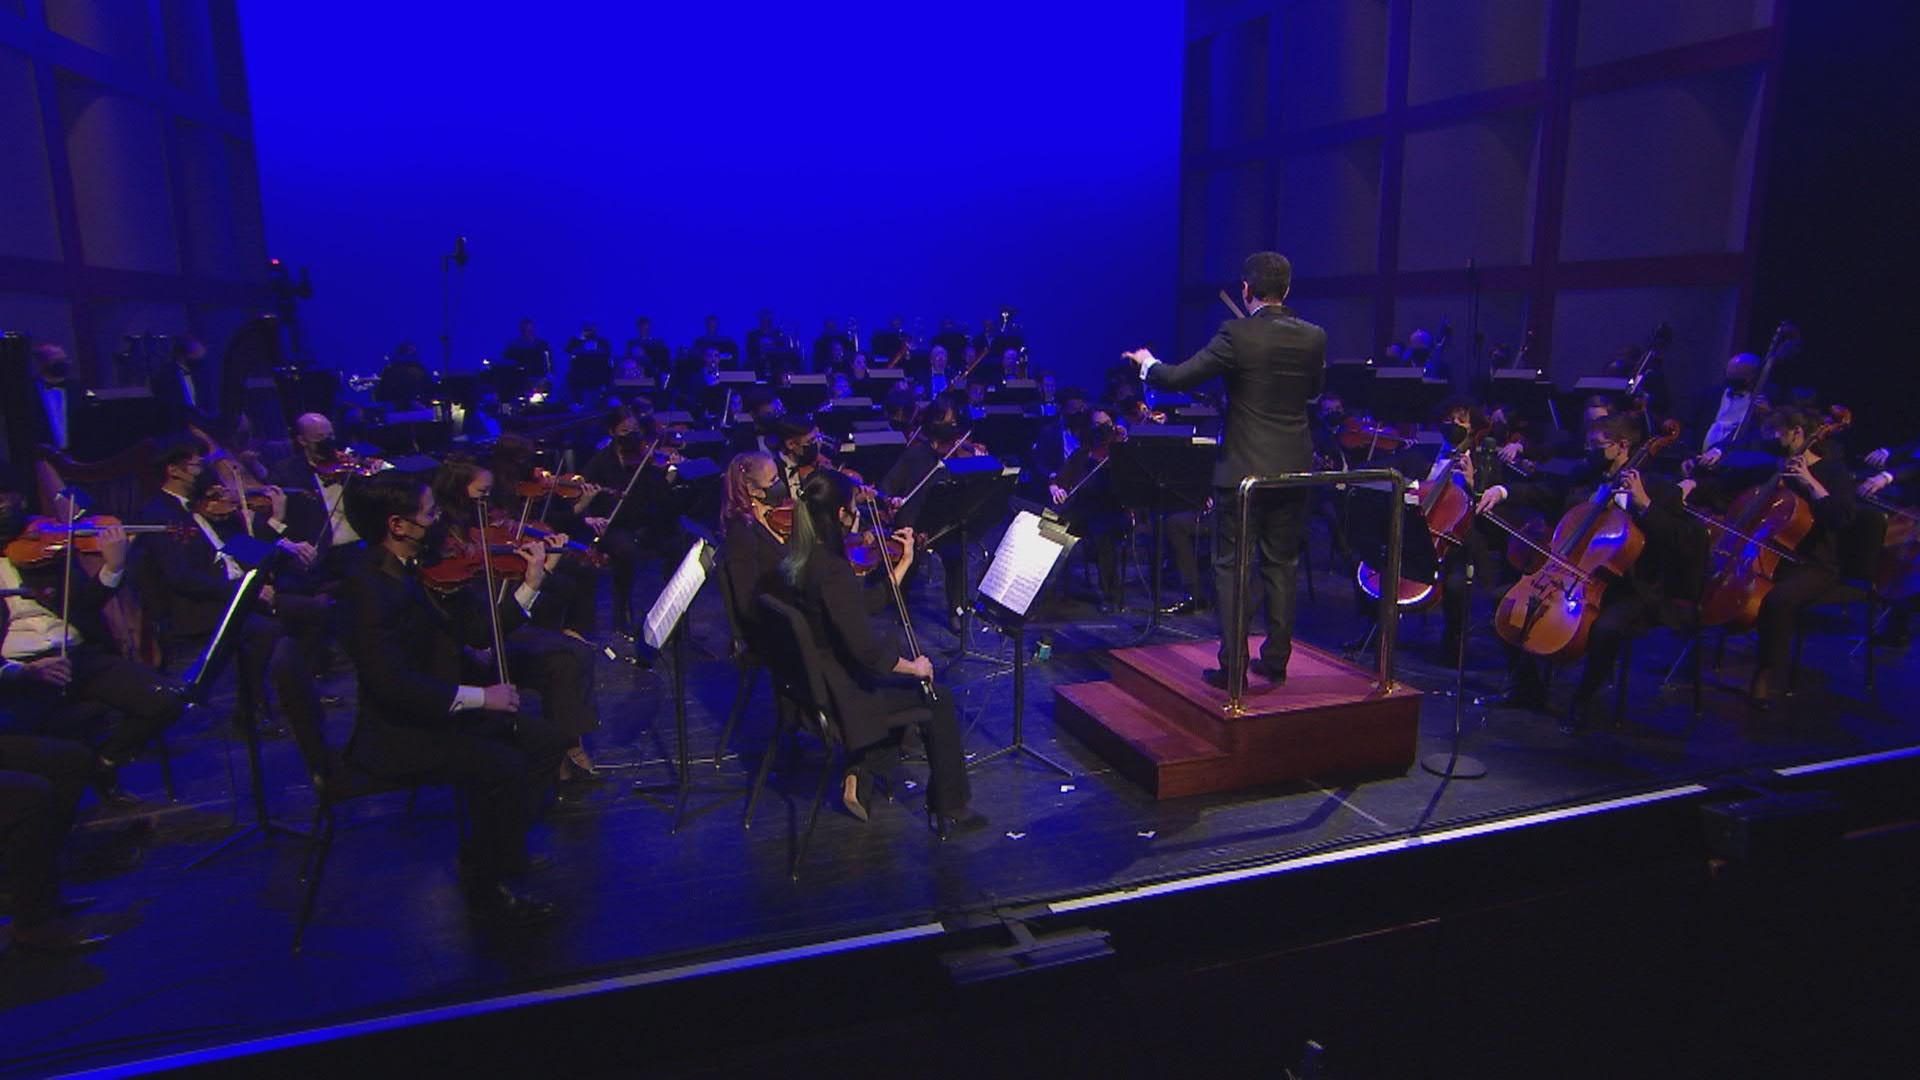 The Lord of the Rings: The Fellowship of the Ring, Concert Medley